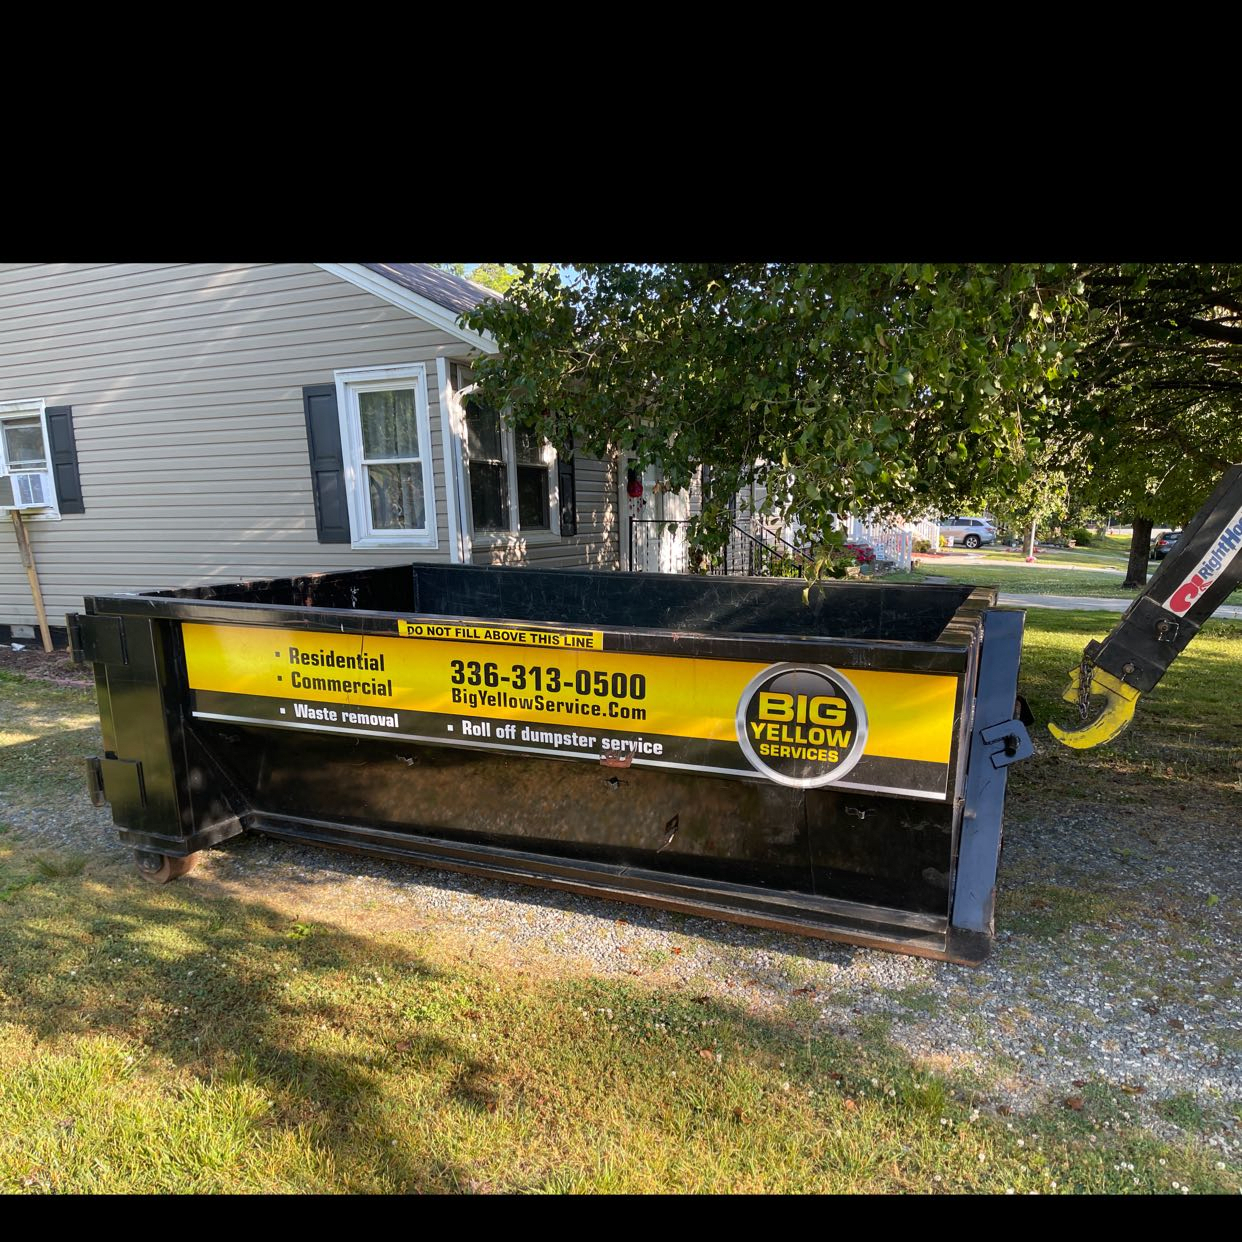 A-519 Piedmont Way Burlington, NC 27217 (2) Privacy Policy | Roll-Off Dumpster and Portable Toilet Rentals | Big Yellow Services, LLC